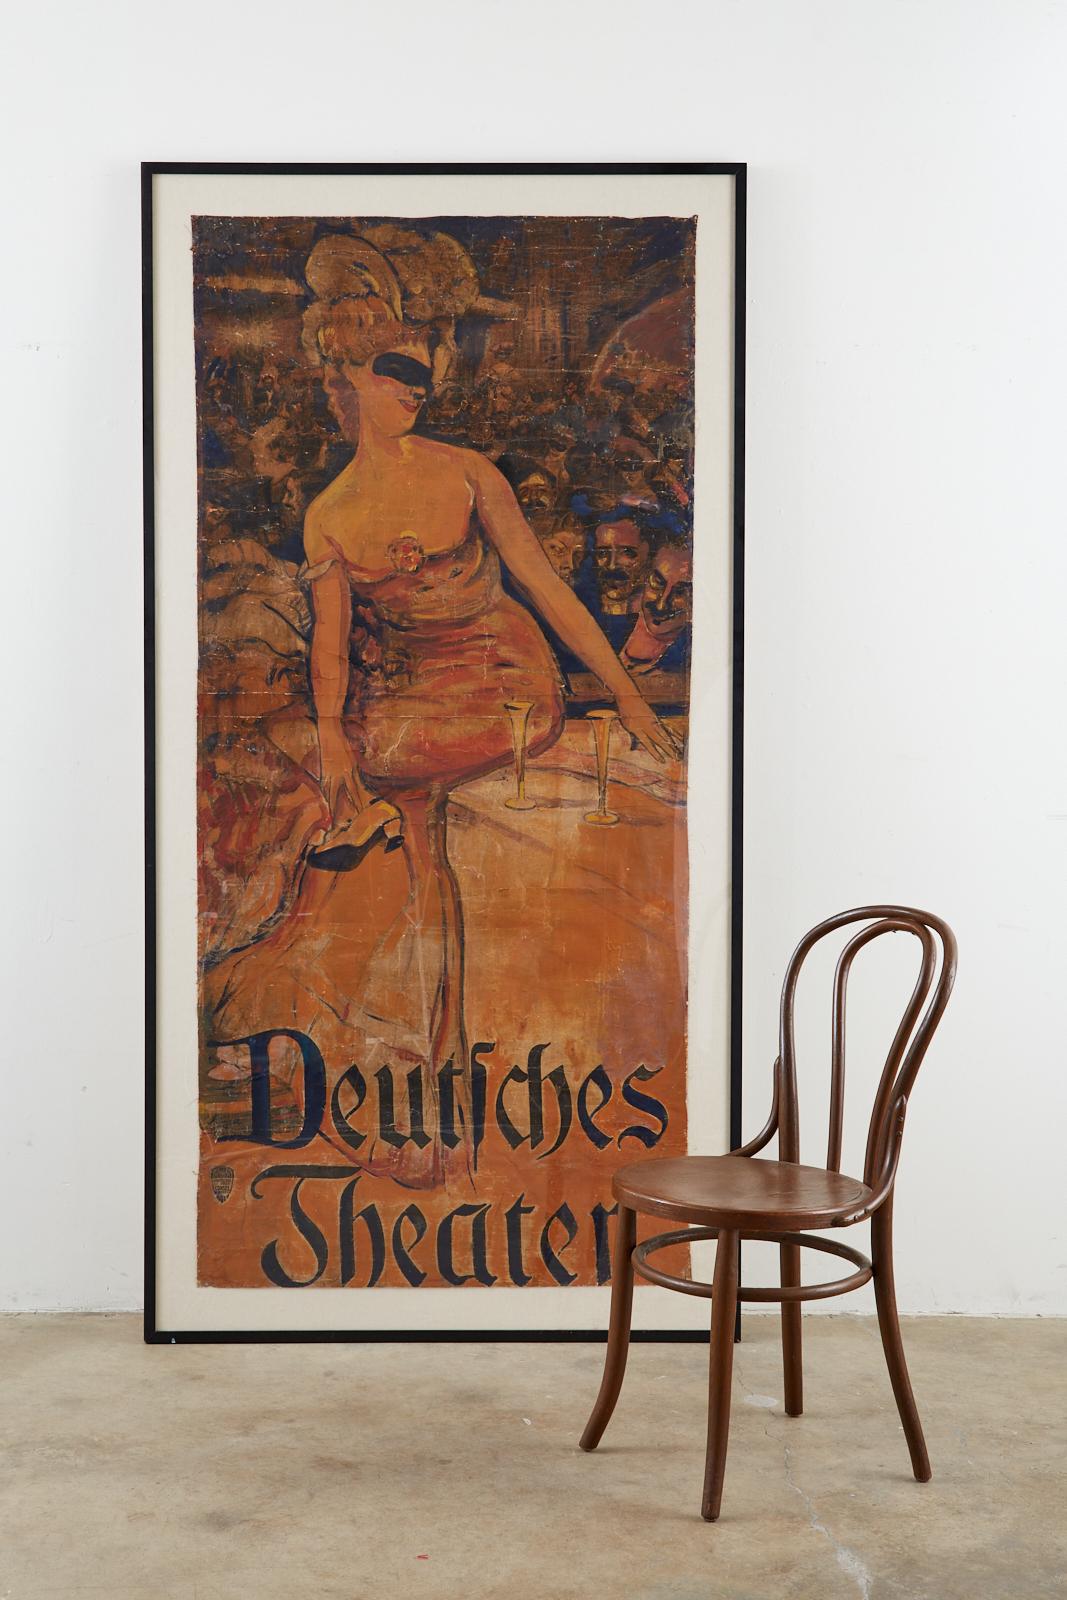 Fantastic photolithograph poster hand painted by Adolf Franz Munzer (German 1870-1953). The original Bal-Pare Deutsches theater poster is painted over and signed by Munzer dated 1905. Laid on a linen backing and set in an ebonized frame with a